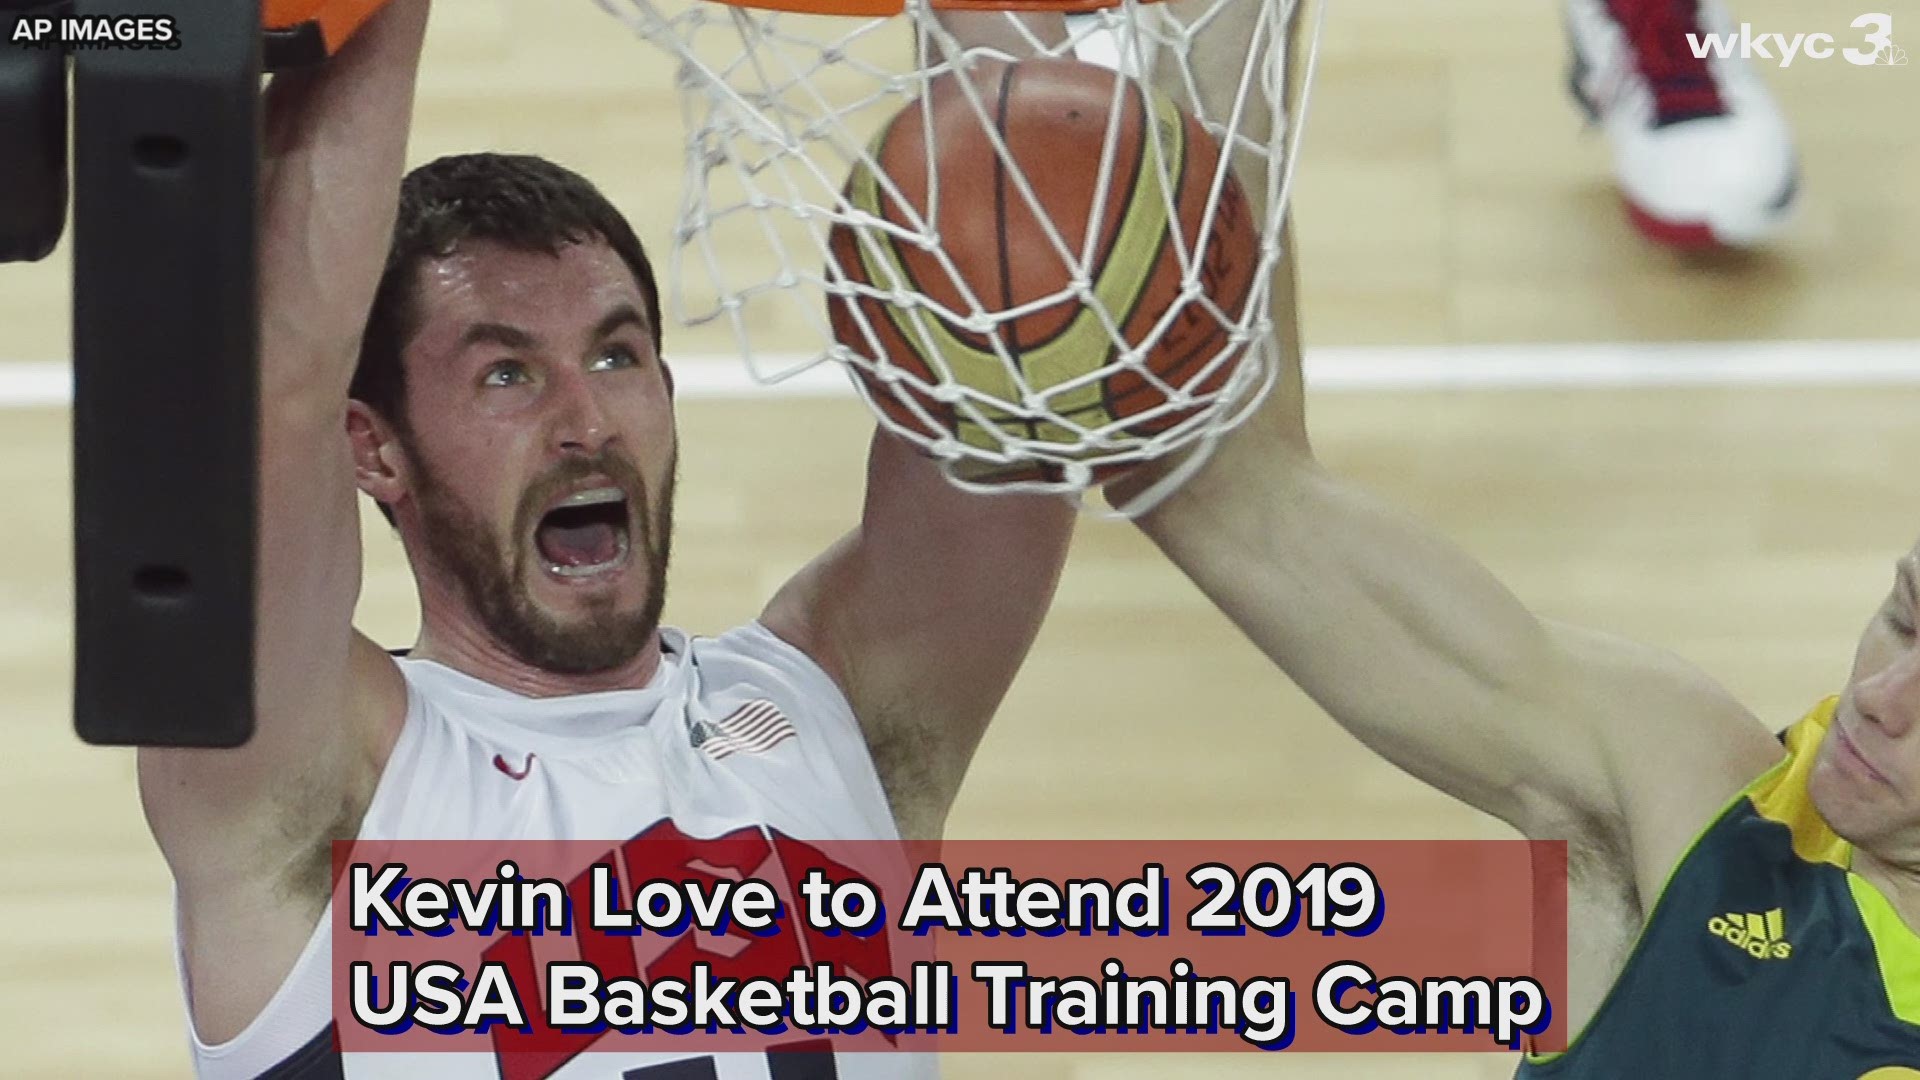 Cleveland Cavaliers power forward Kevin Love has been selected to attend the 2019 USA Basketball Men’s National Team Training Camp.